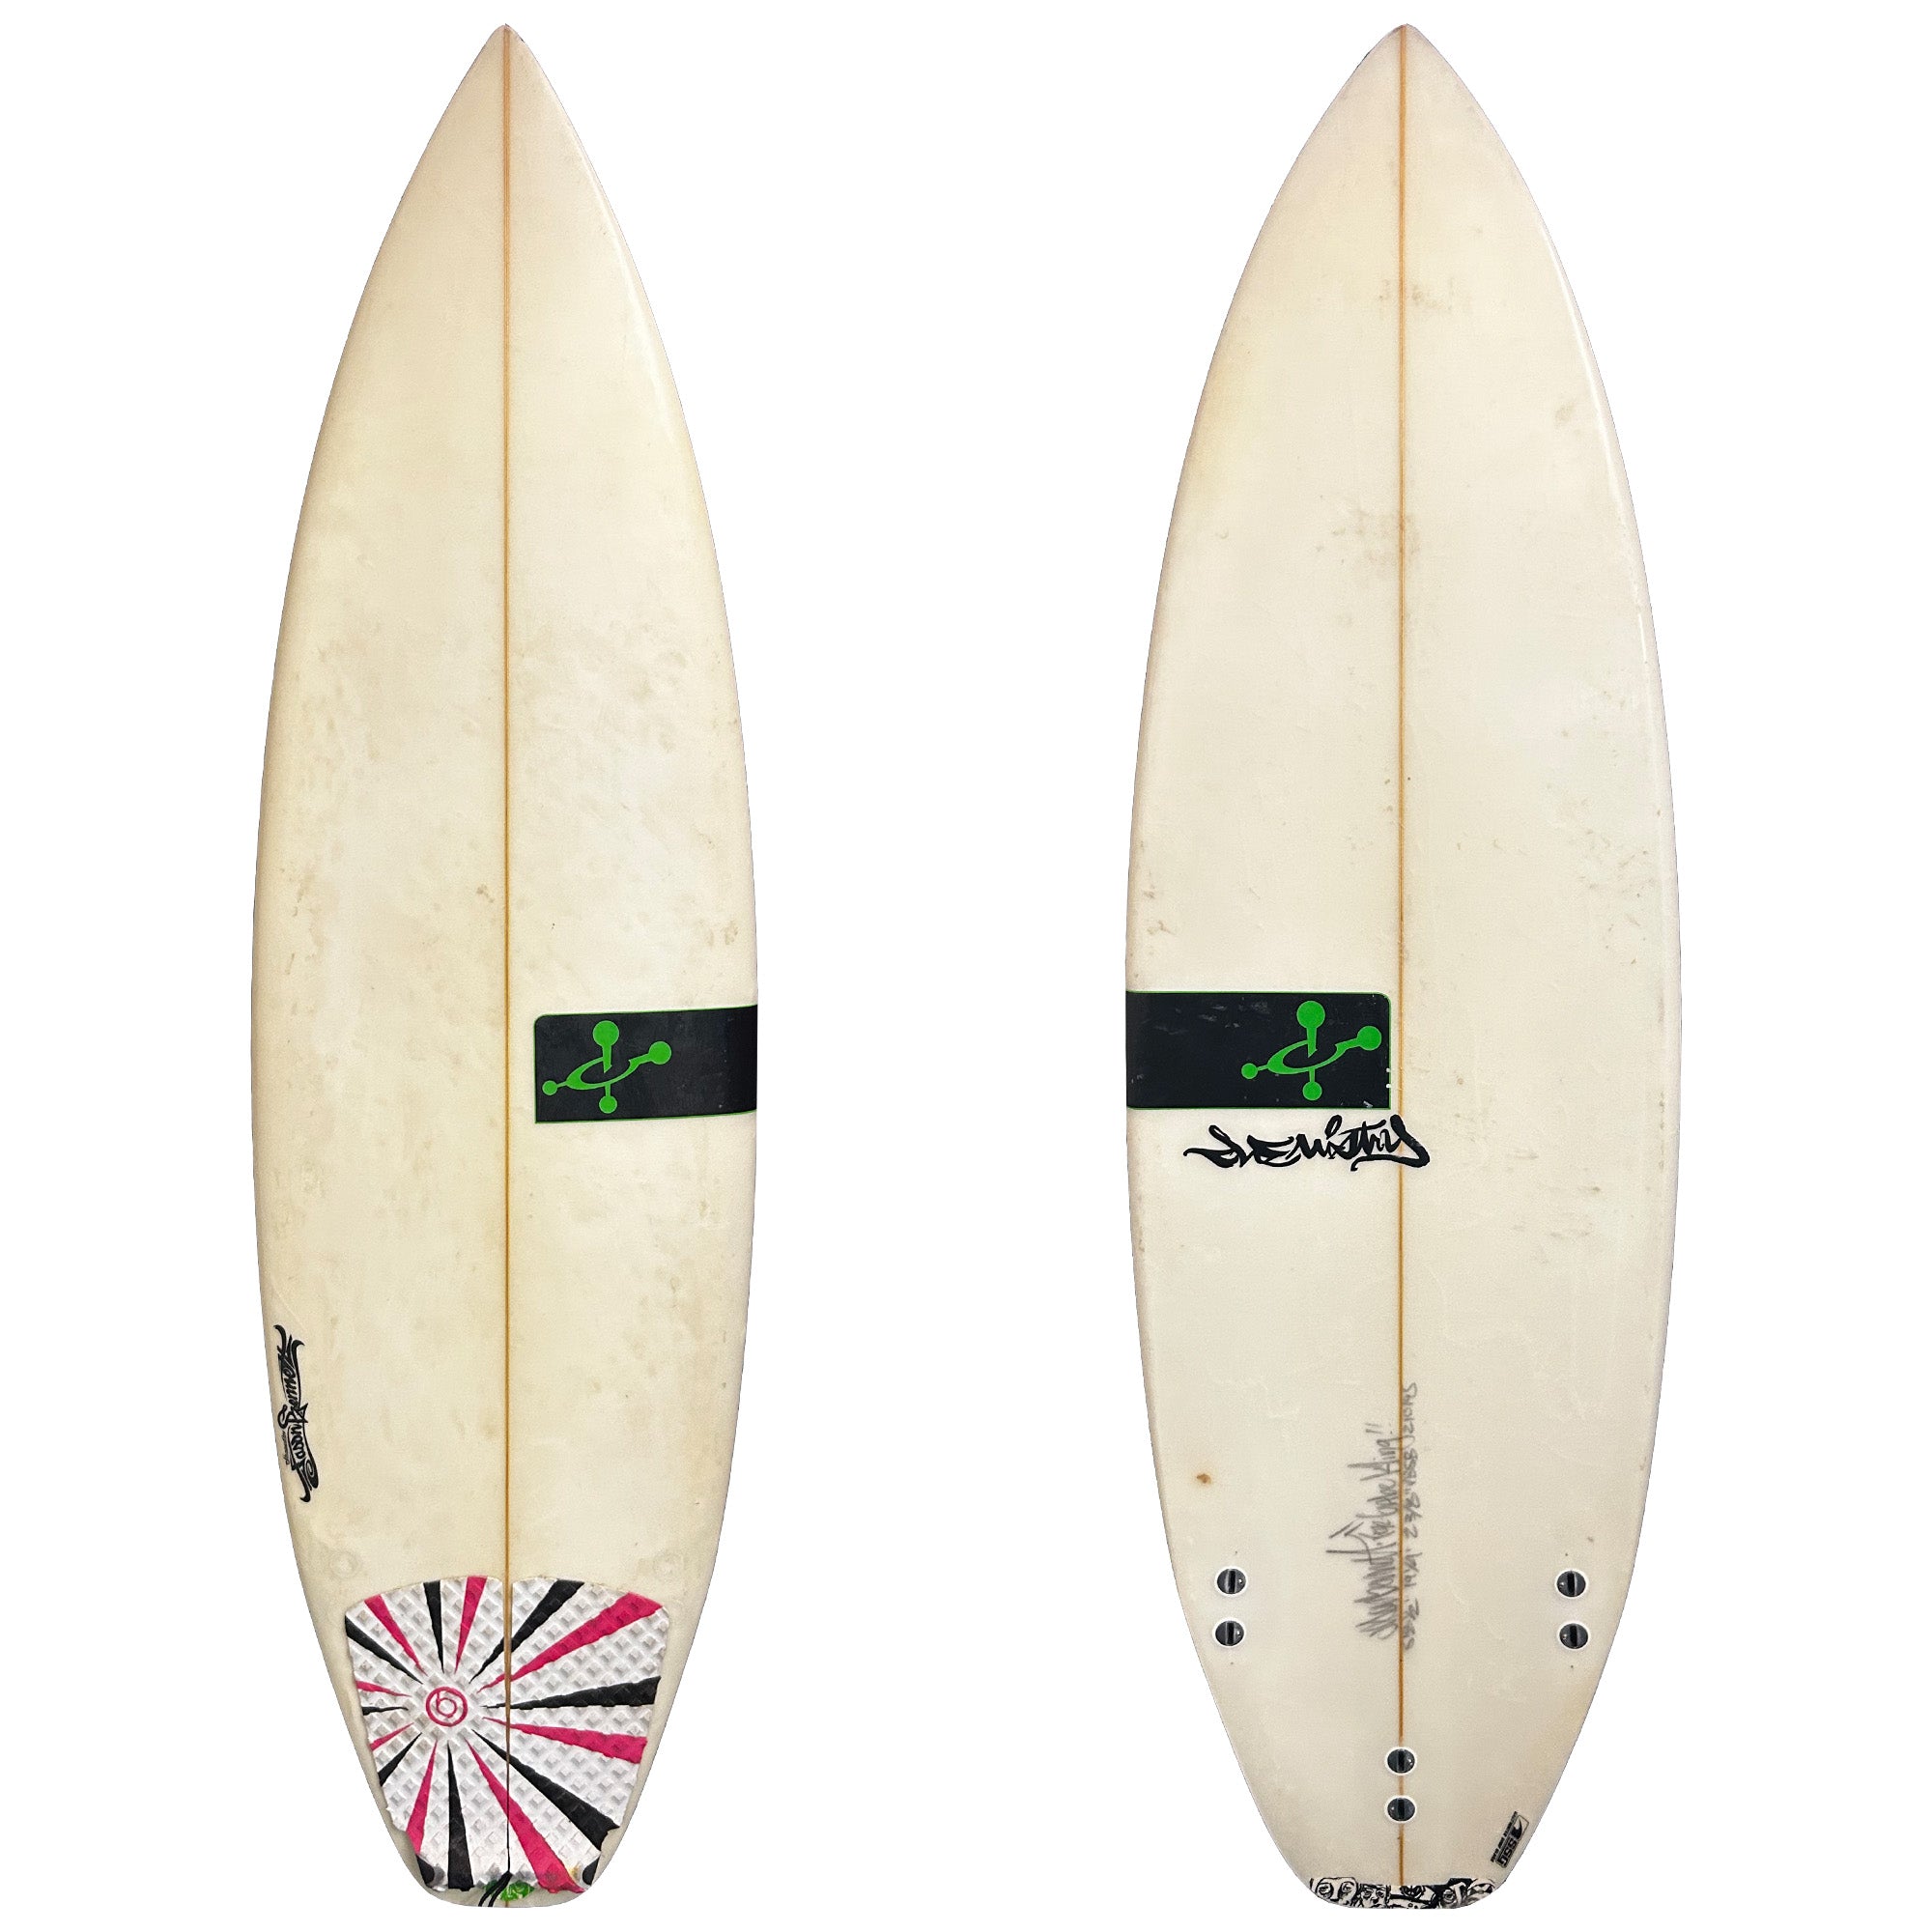 Chemistry 5'8 1/2 Consignment Surfboard